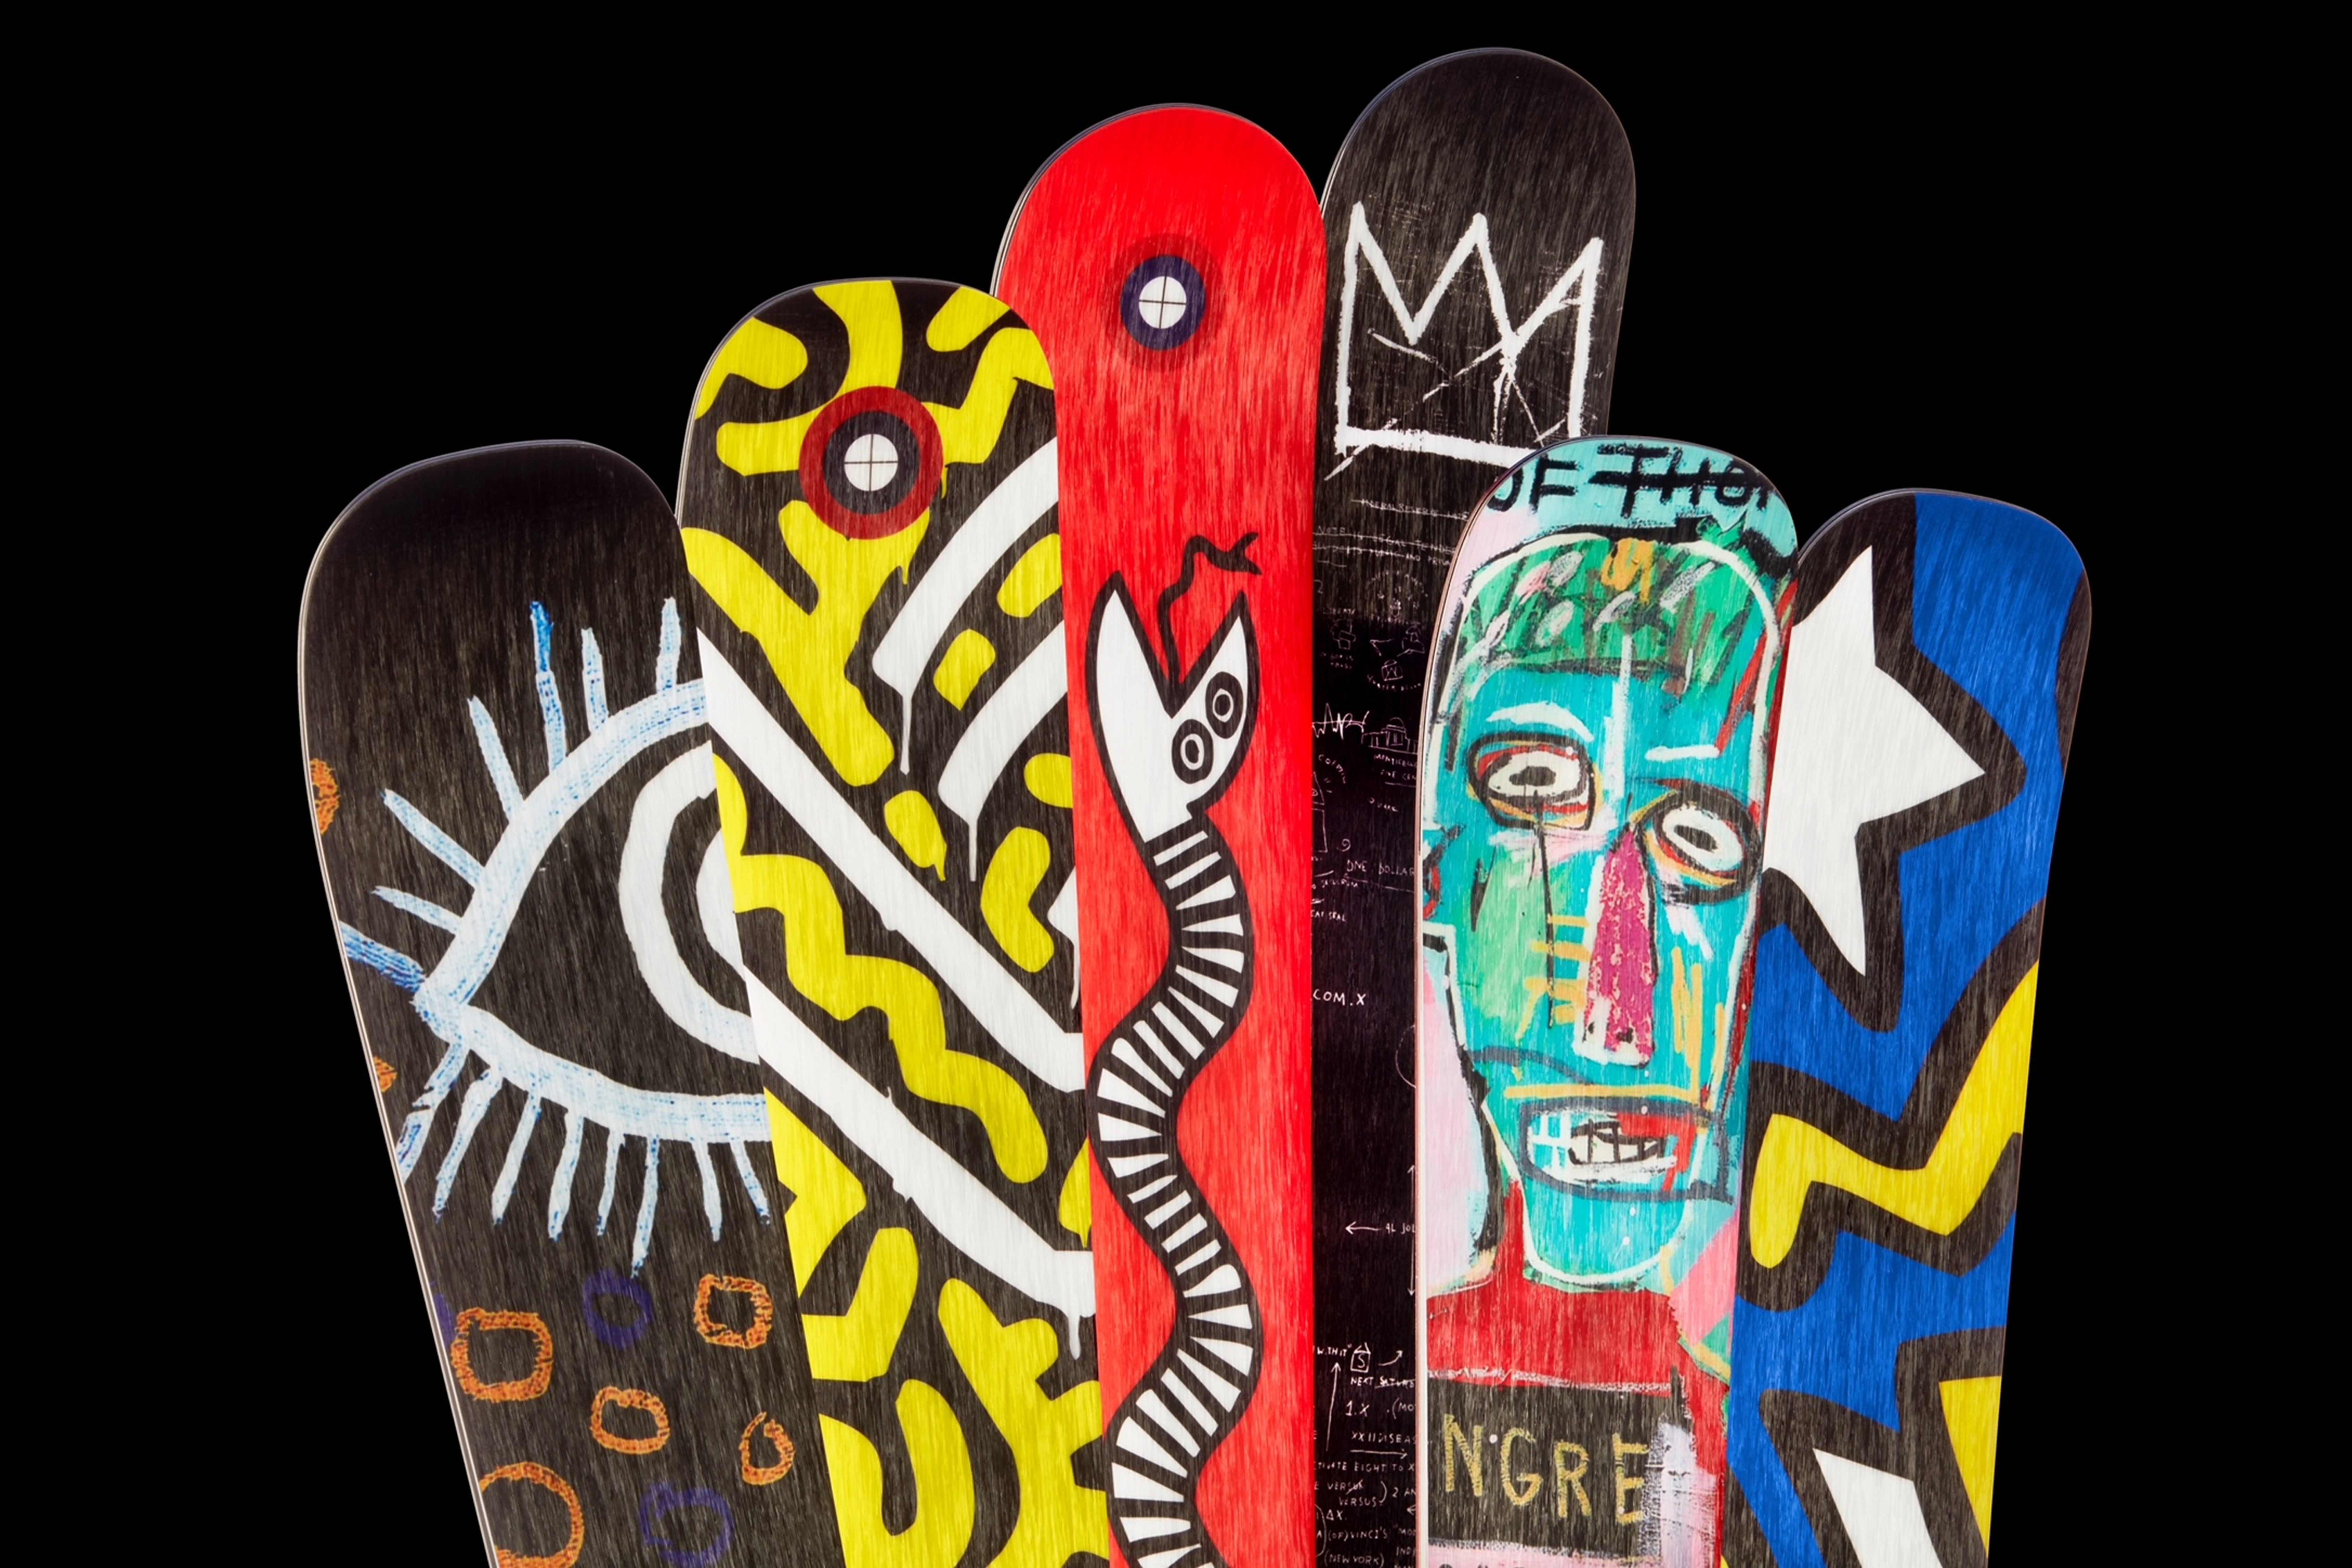 Be the hippest skier on the slopes this winter with the limited-edition Artist Series skis offered by Bomber, designers of artisan-crafted ski products located at the foot of the Italian Alps.